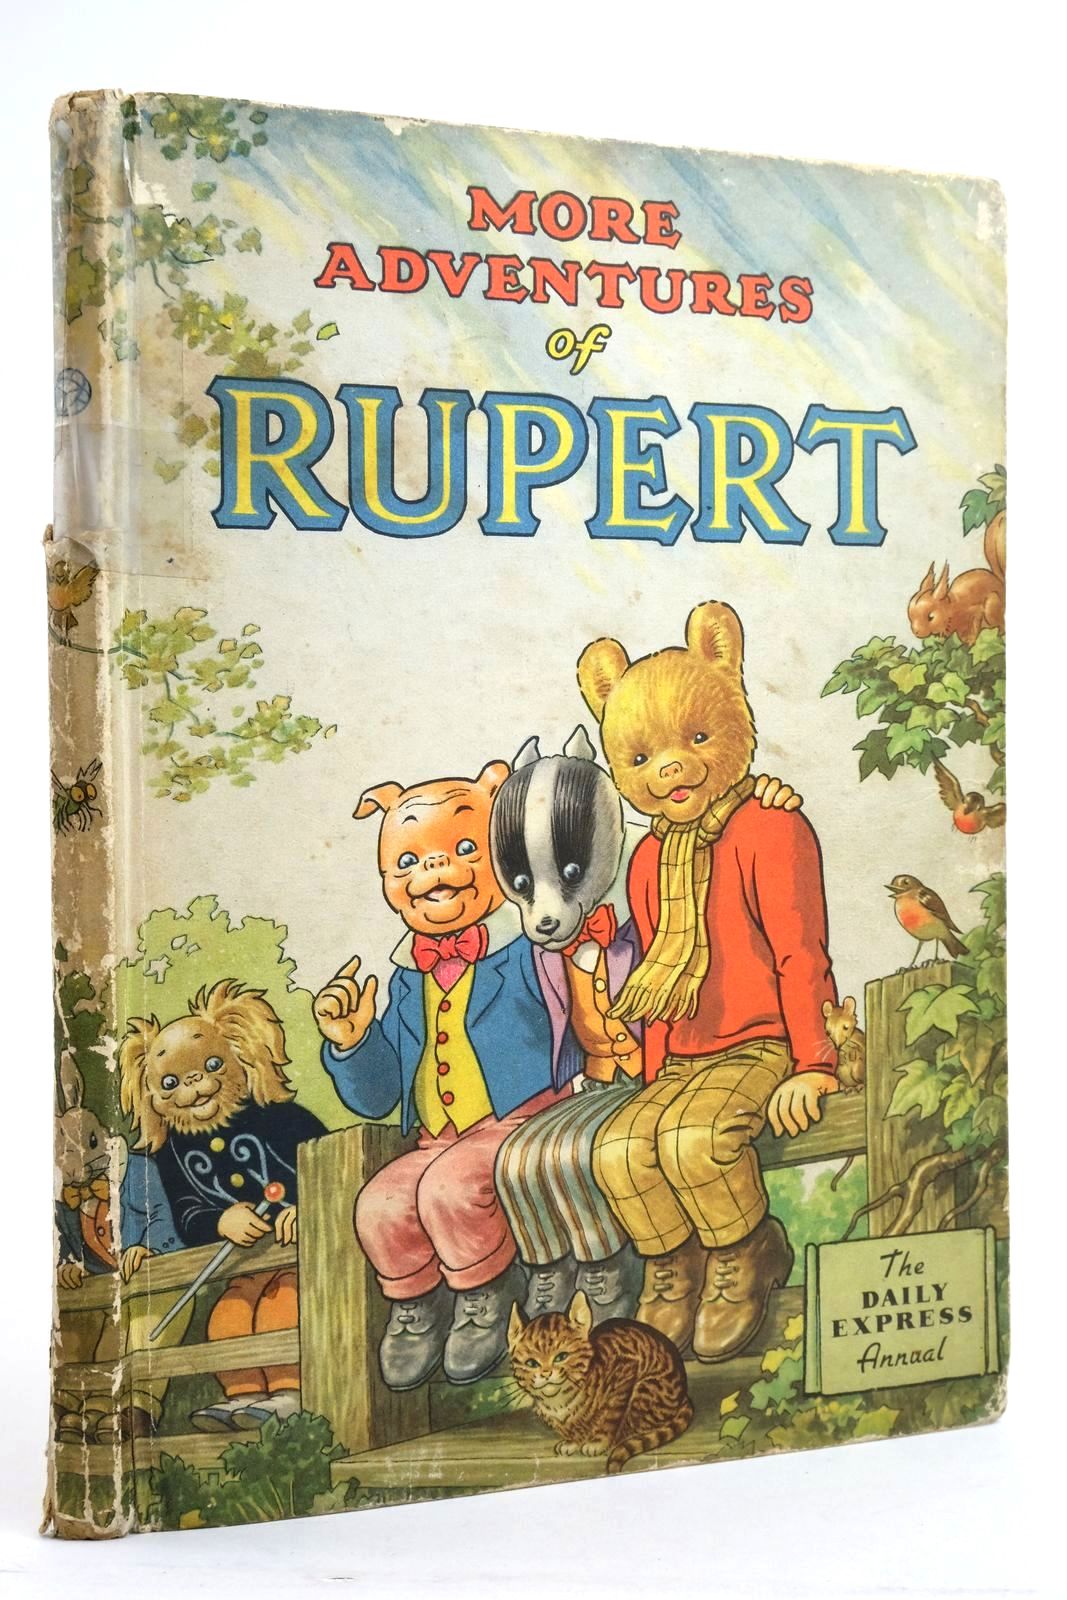 Photo of RUPERT ANNUAL 1953 - MORE ADVENTURES OF RUPERT written by Bestall, Alfred illustrated by Bestall, Alfred published by Daily Express (STOCK CODE: 2135862)  for sale by Stella & Rose's Books